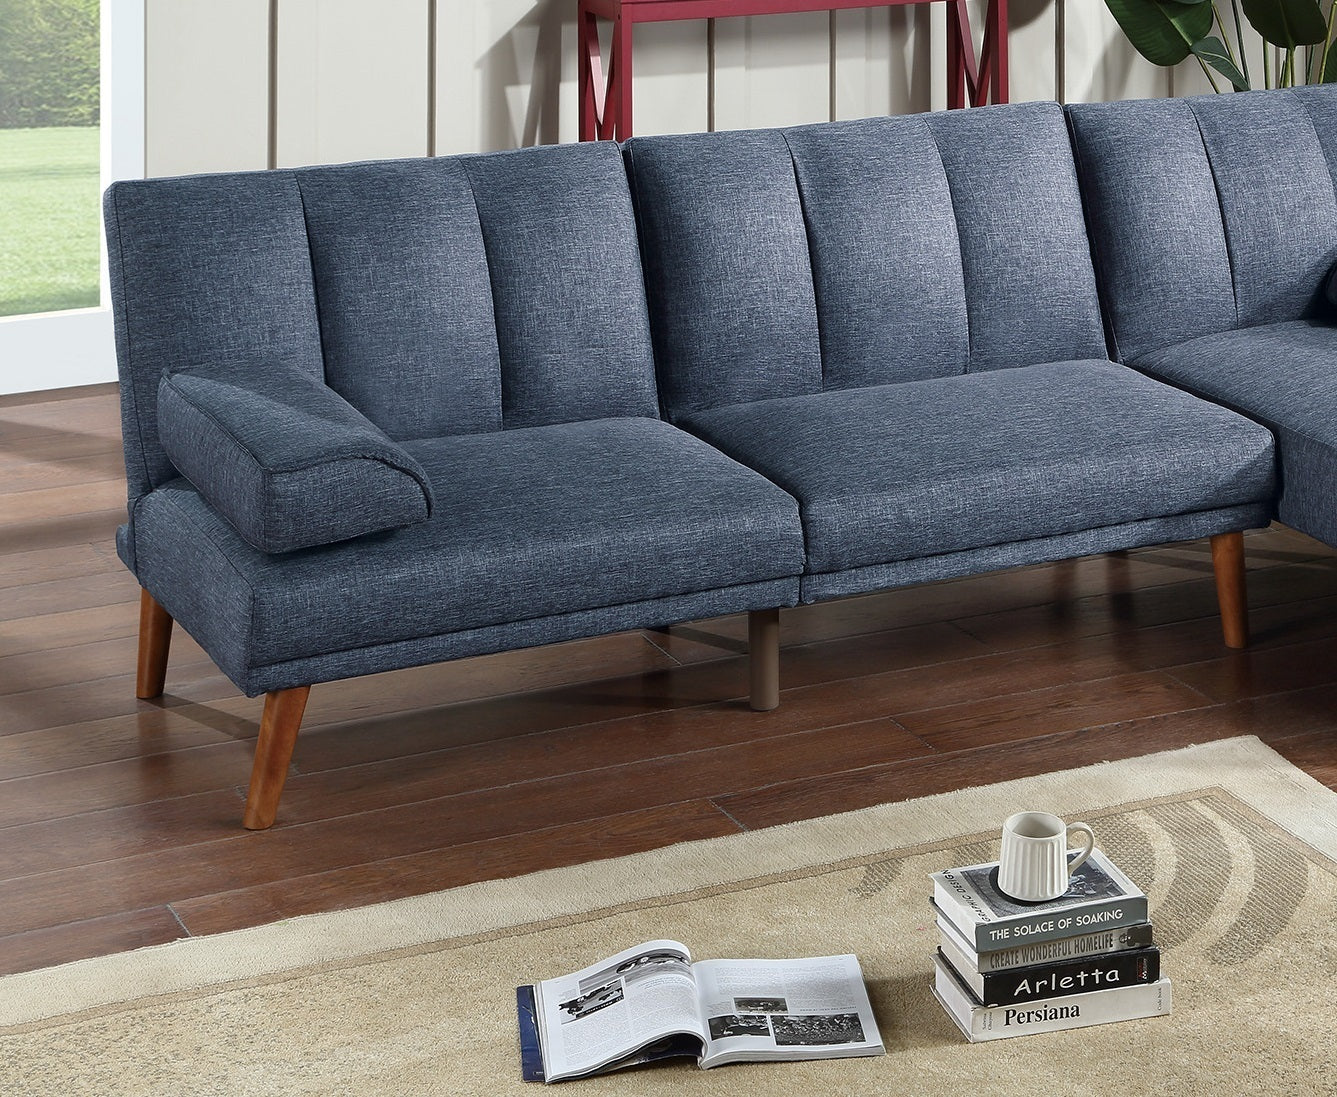 BASIT Collection Navy Polyfiber Adjustable Sofa Living Room Furniture Solid wood Legs Plush Couch